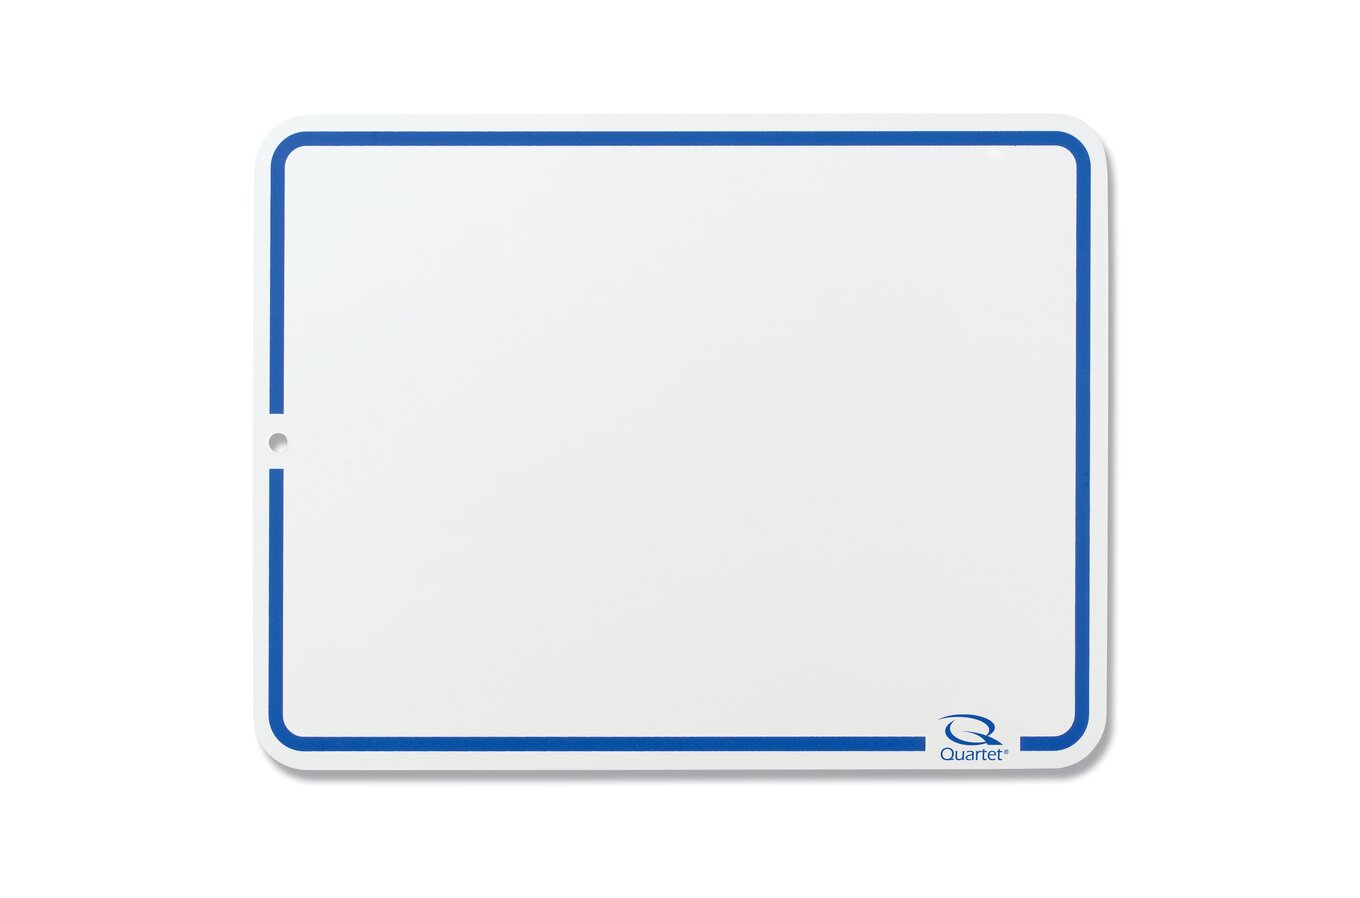 Dry Erase Lap Boards-12 x 18-Great for use in the classroom